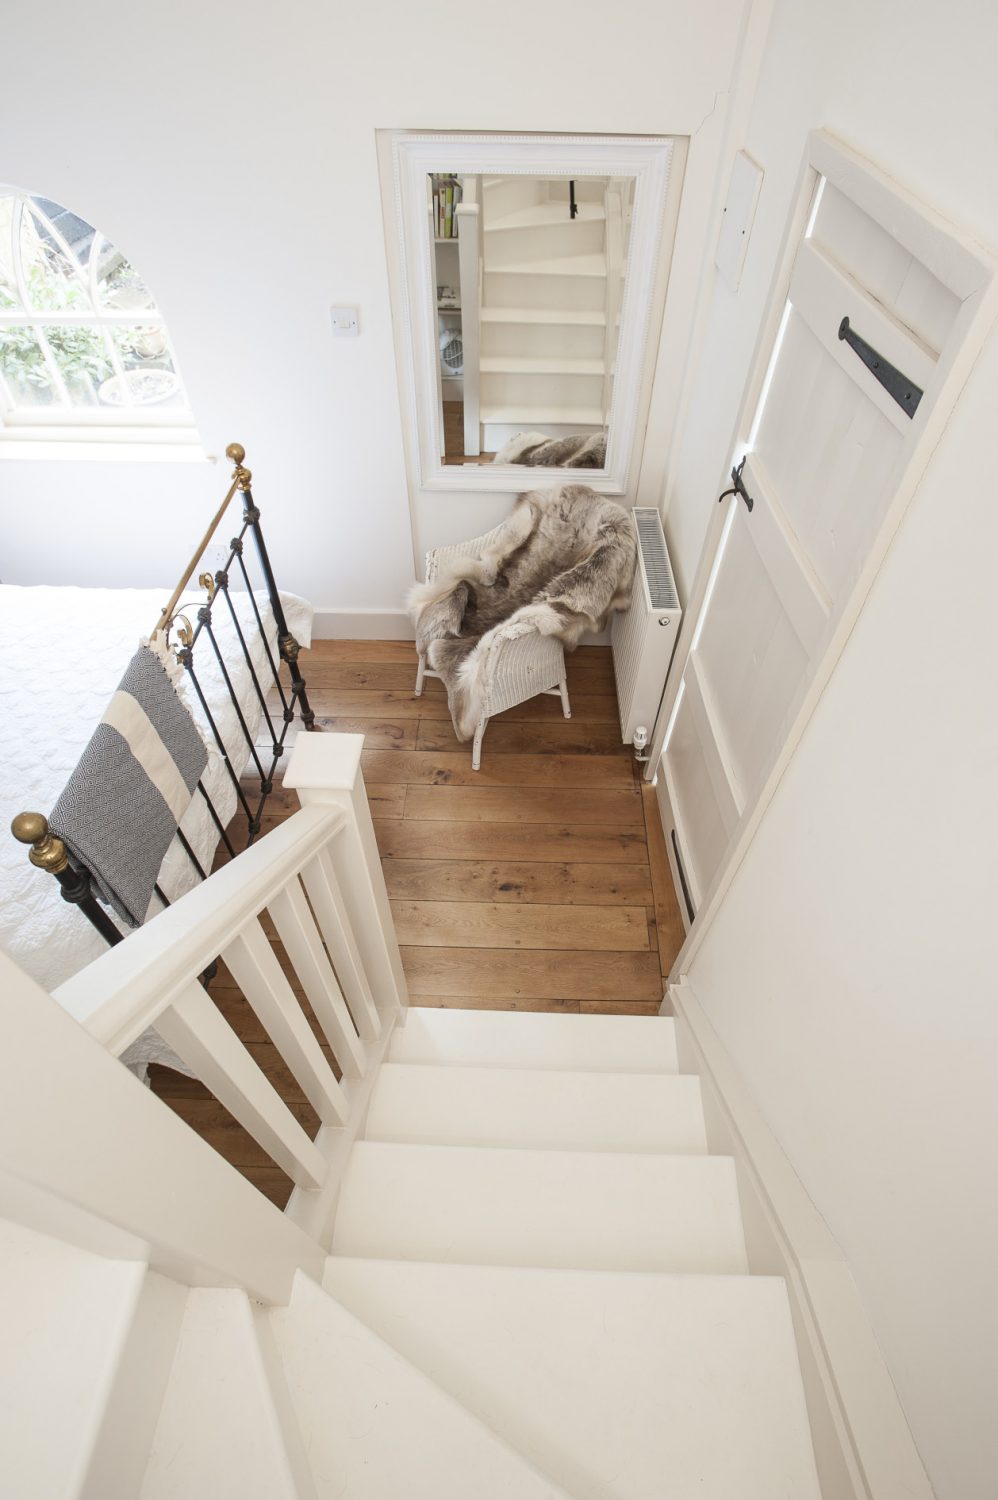 Up the stairs, off a little white galleried landing, is a wonderful en suite bathroom with roll-top bath